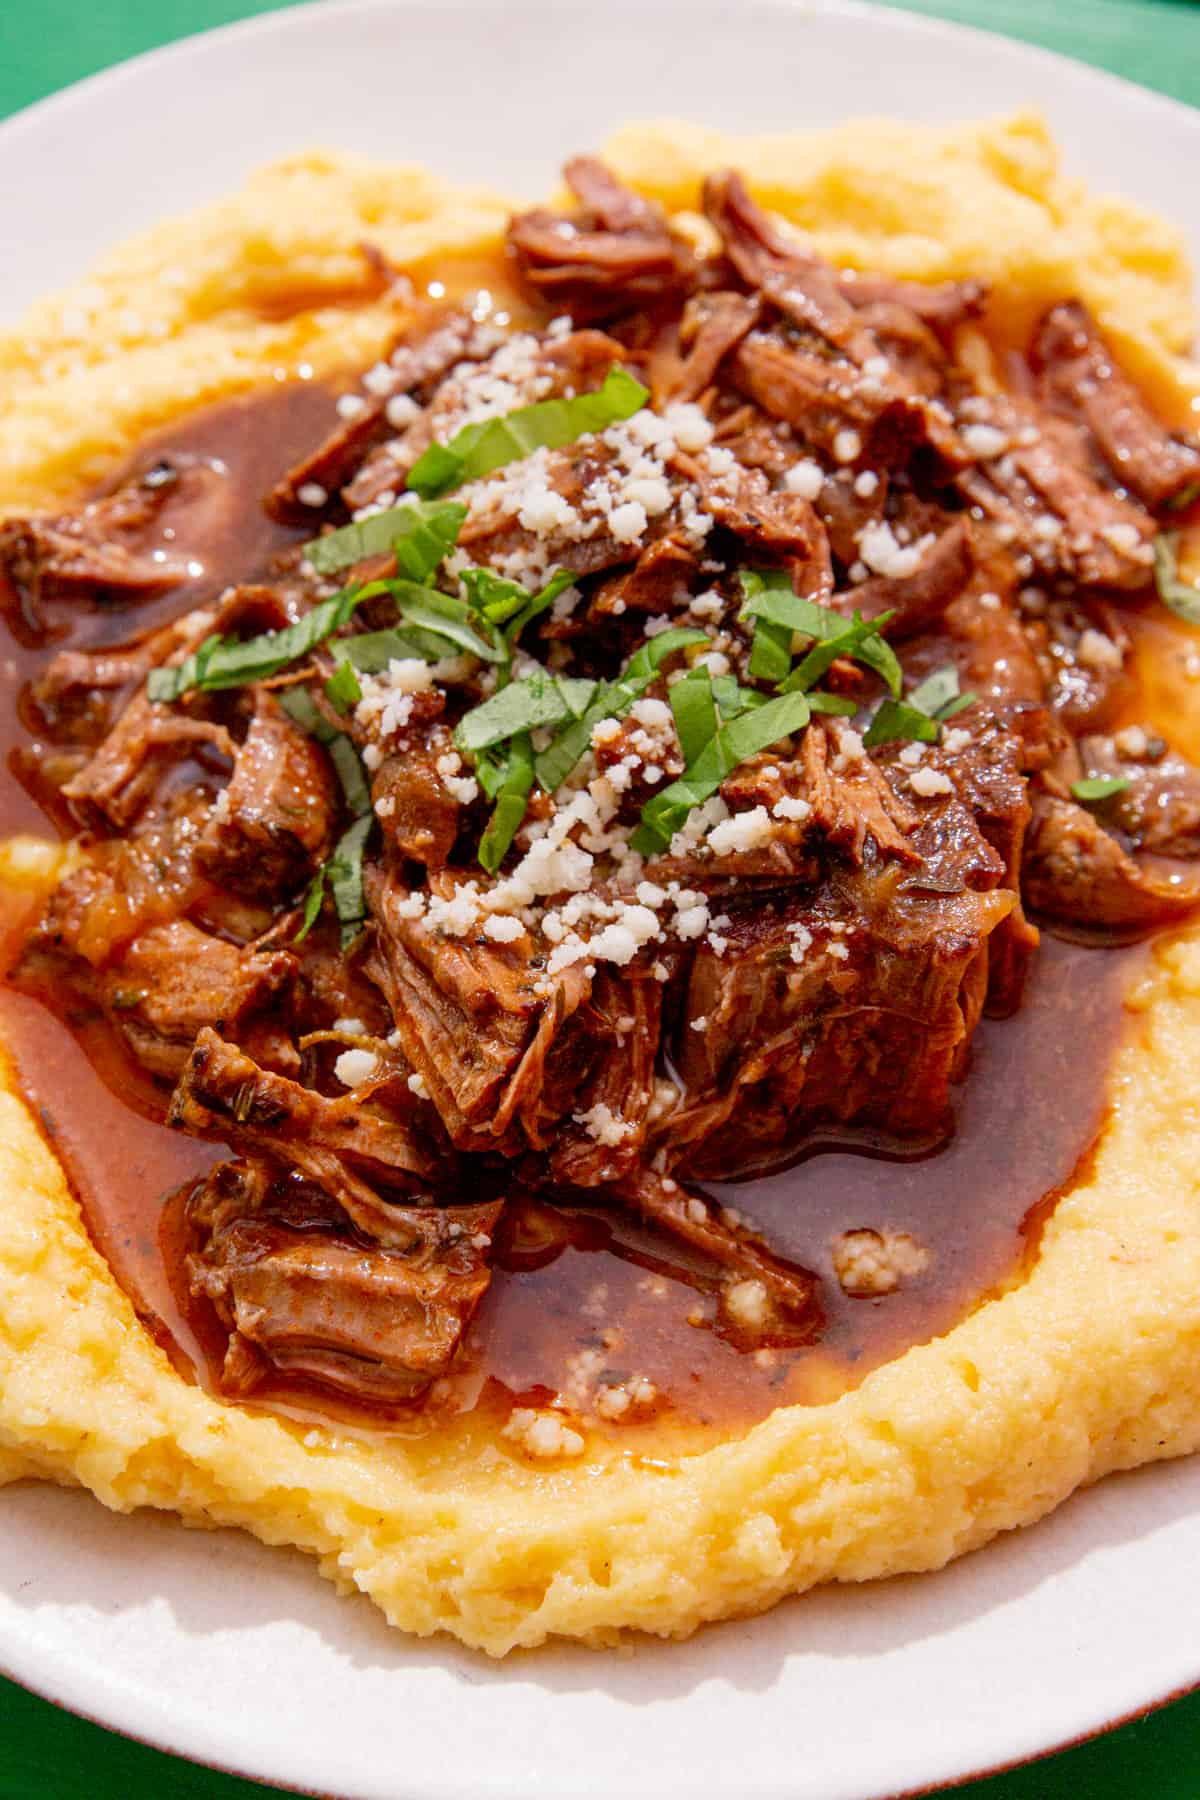 A close up of shredded steak with gravy served over a bed of polenta.